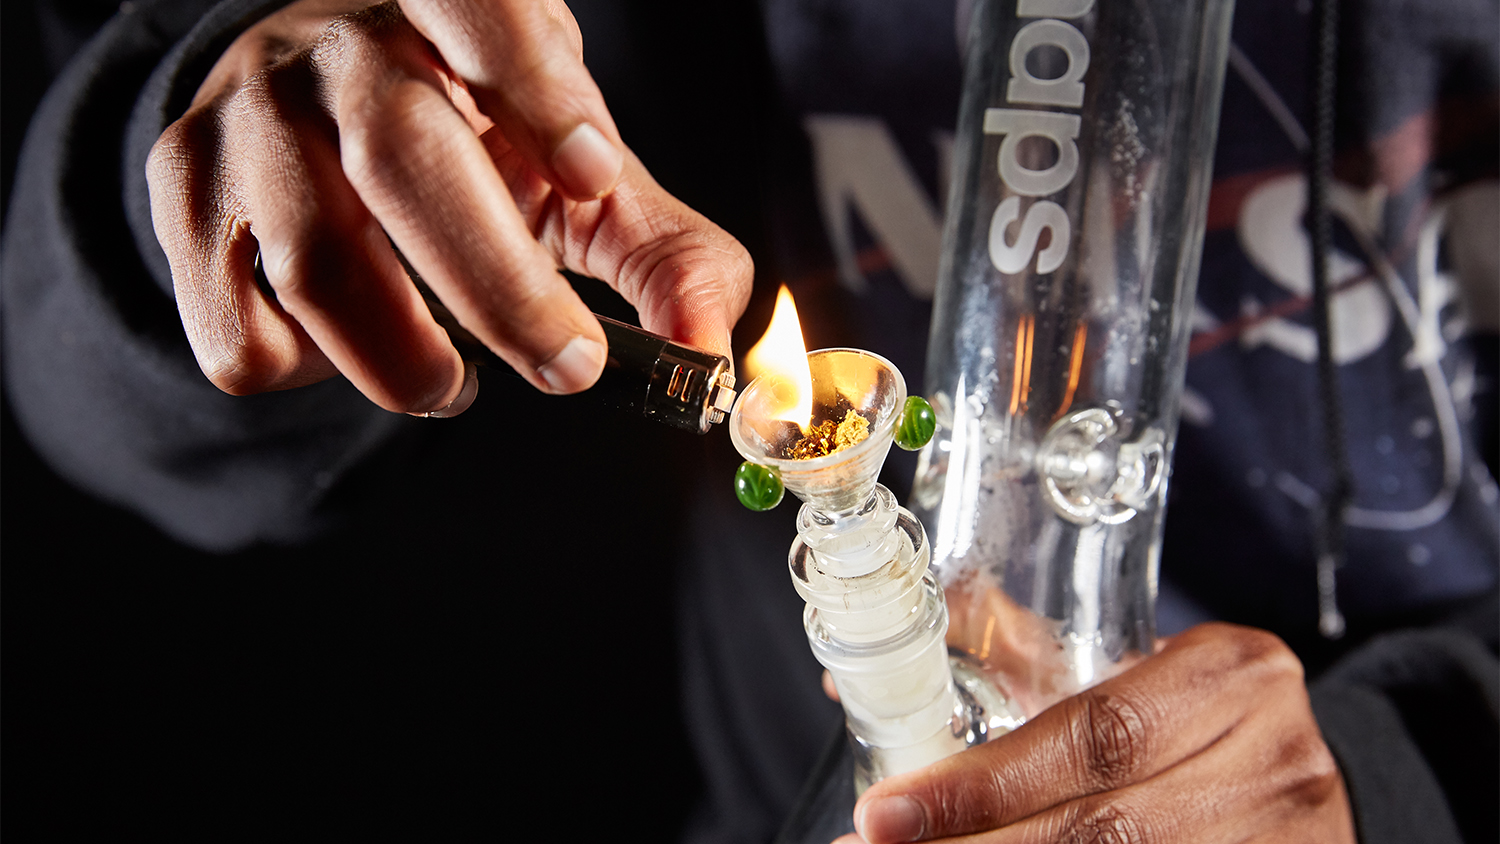 Bong And Its Effects. Know All About It.